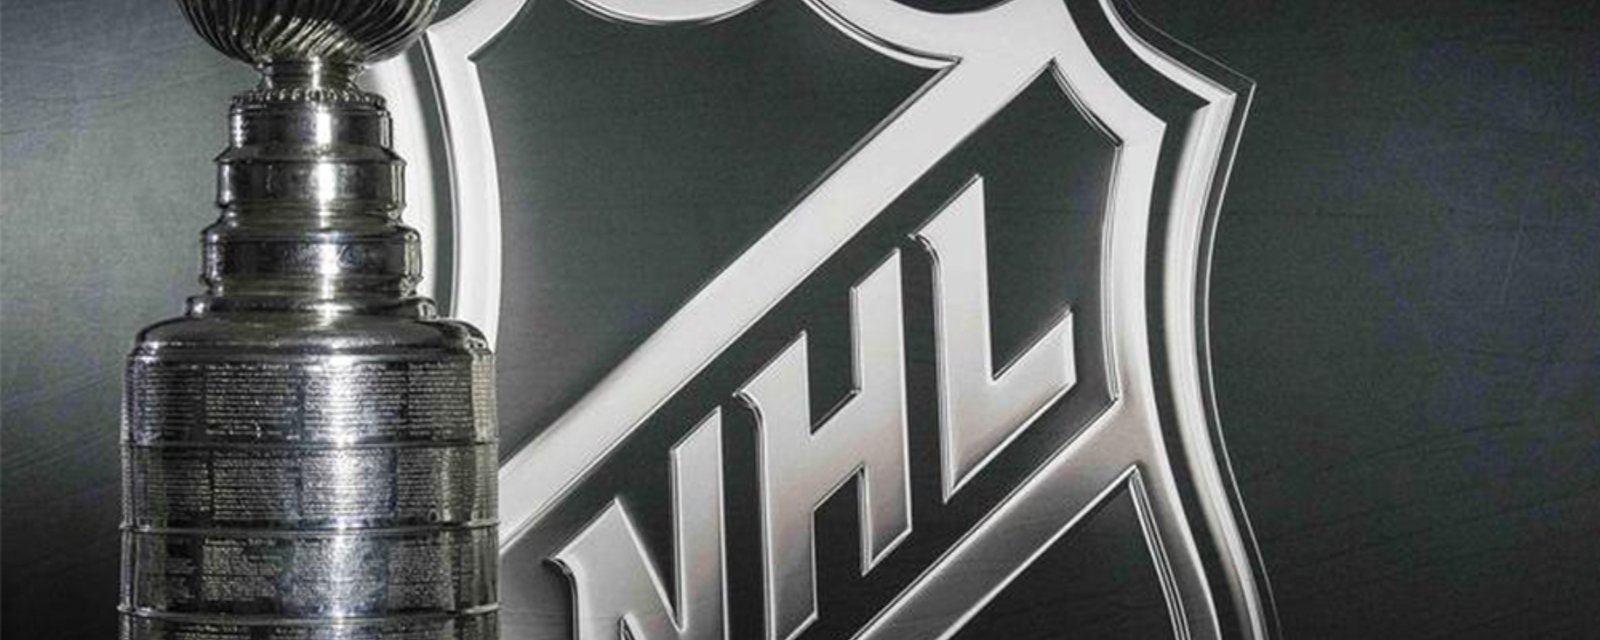 NHL officially release dates and details of its Return to Play plan